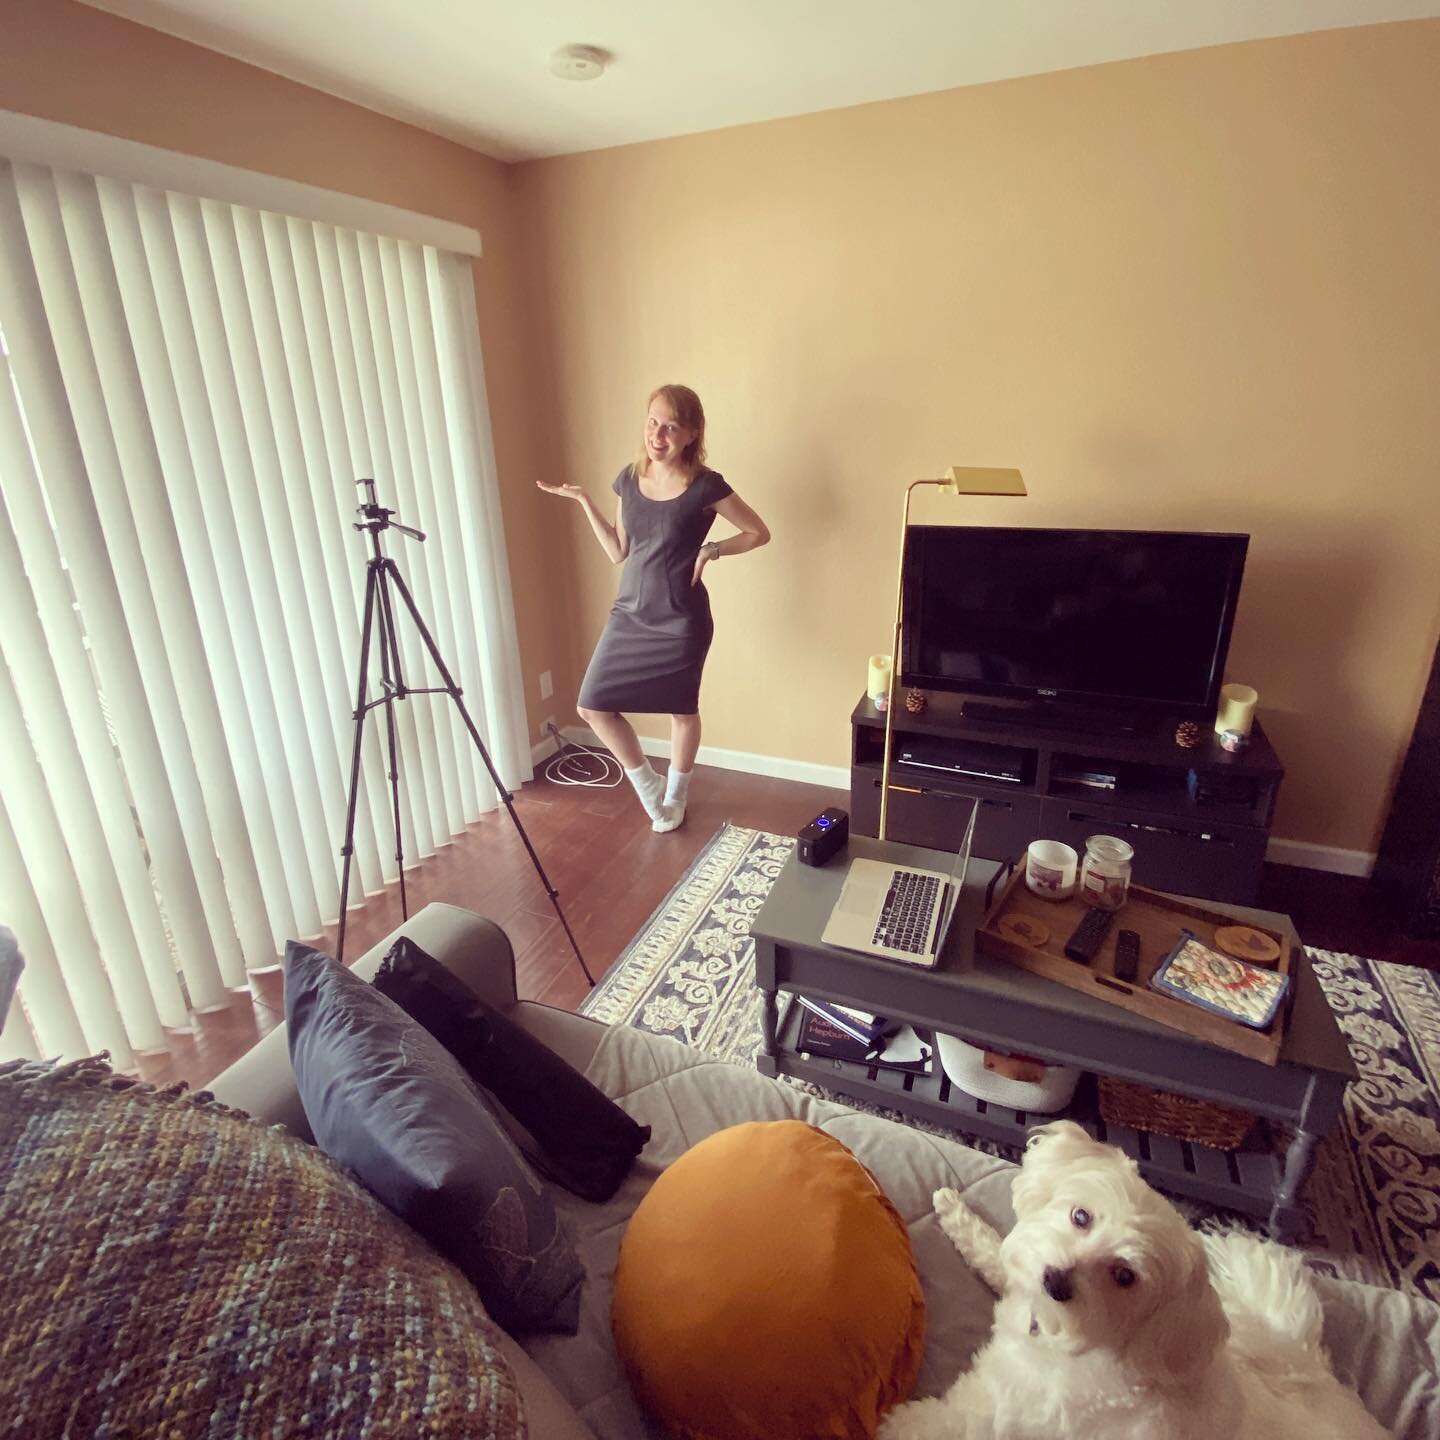 The benefits of recording at home: fuzzy socks and a pup for my audience! 

I&rsquo;ve made so many excuses lately not to sing or practice. 

I don&rsquo;t have fancy lighting. 
I don&rsquo;t have good sound equipment. 
It&rsquo;s too cold. 
I don&rs